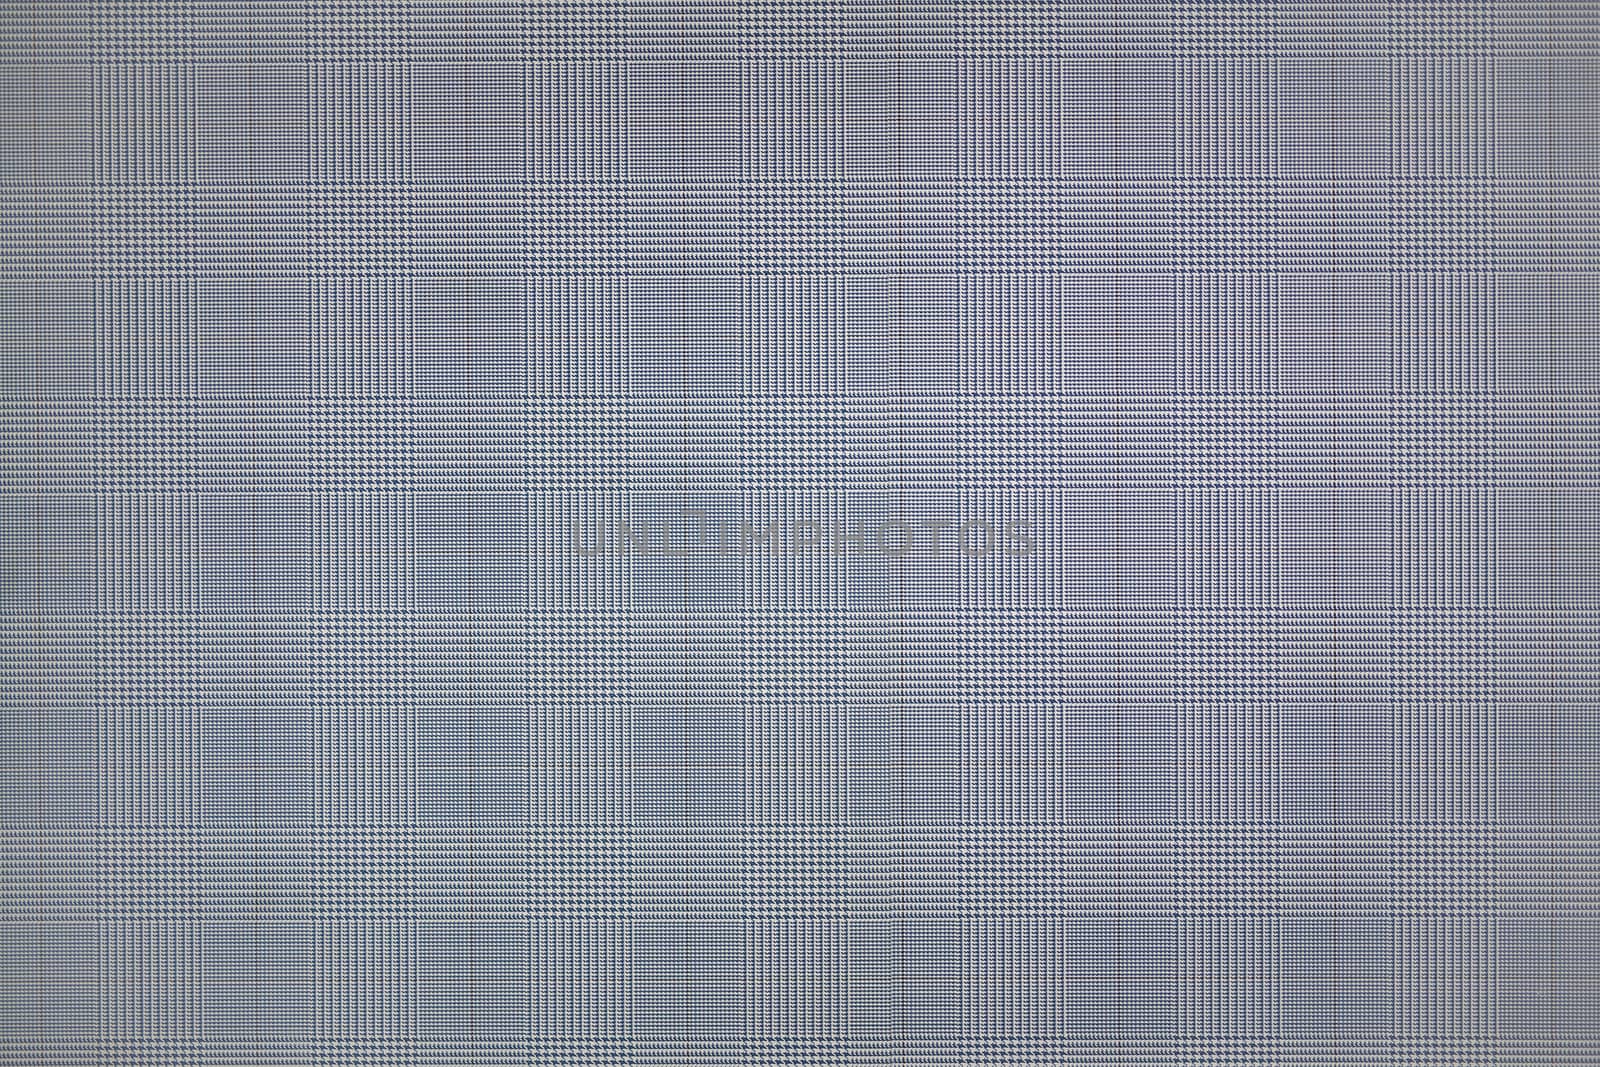 Background in a grid, on the wall paper Wallpaper blue square pattern by dikkens